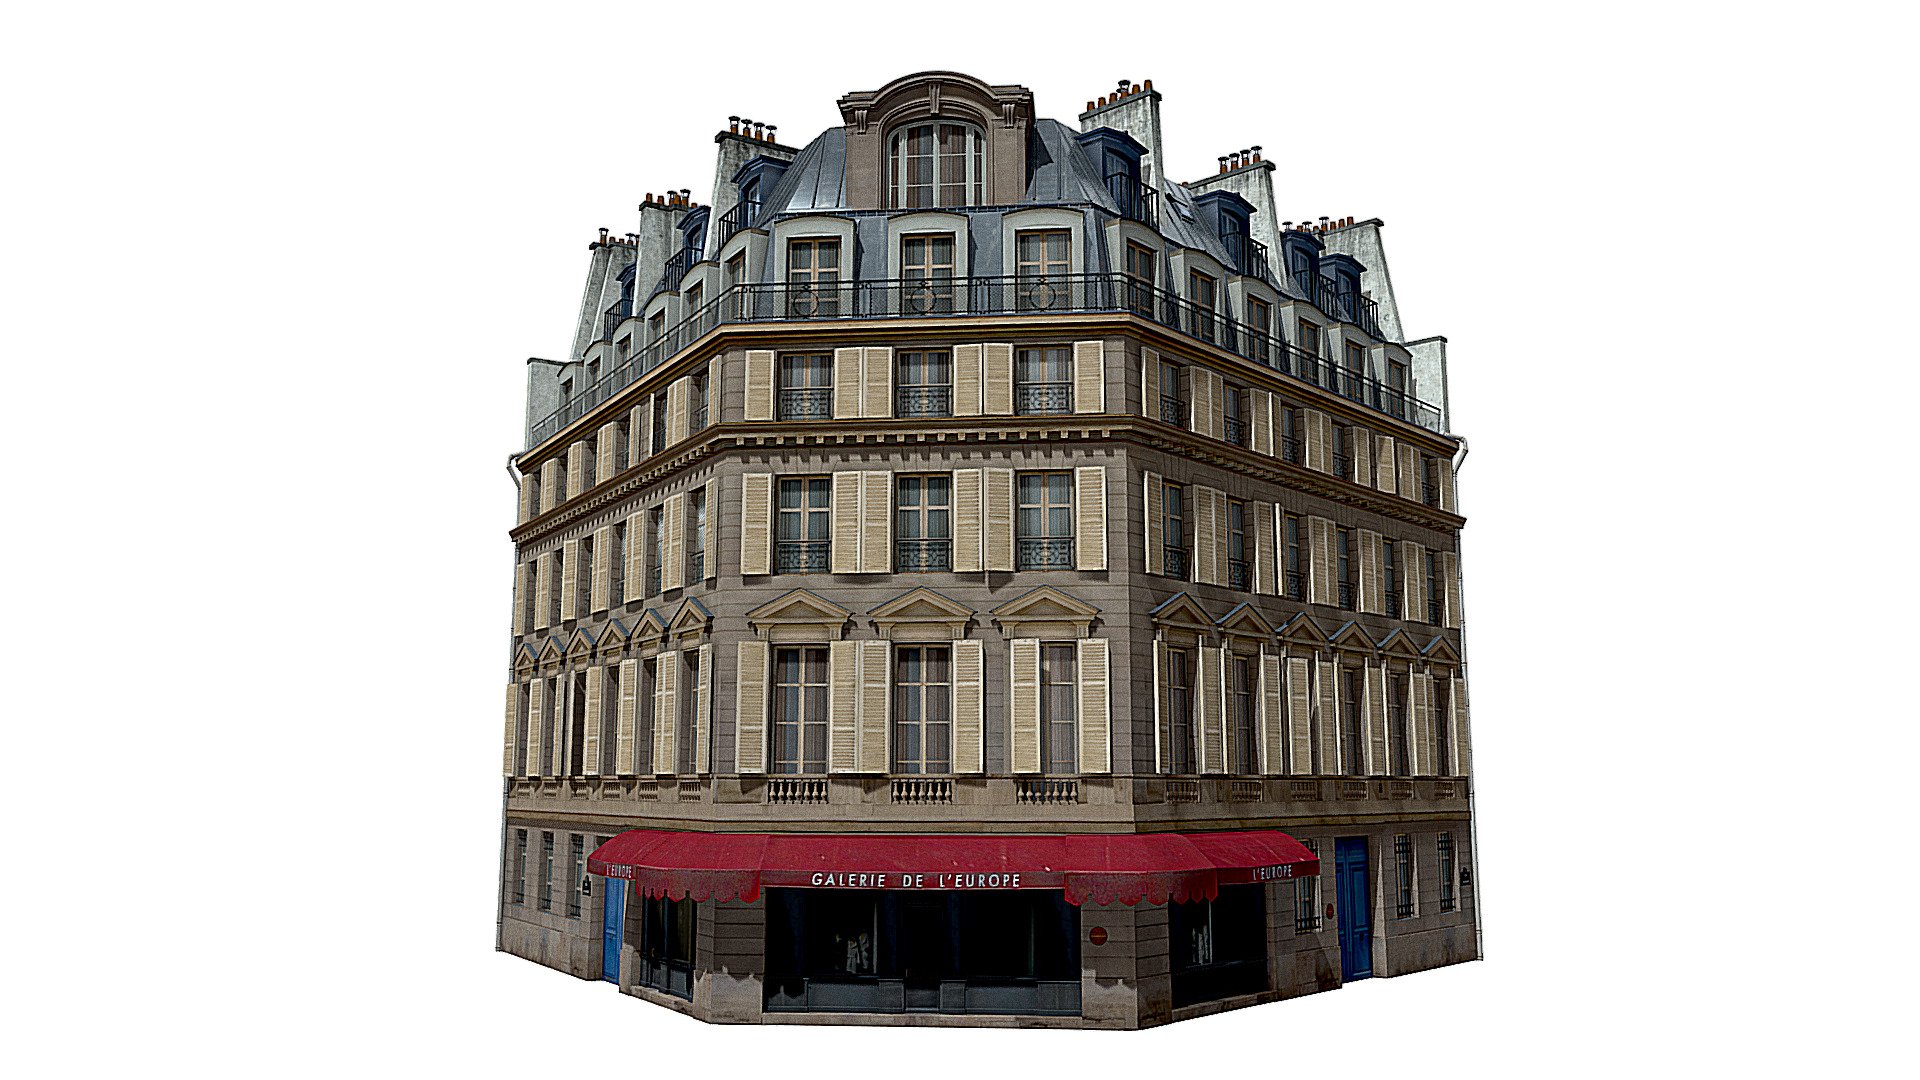 This Parisian corner building is a high end, photorealistic 3D model, that is created to help you add the realism to your project.

The model is suitable for any visual production - broadcast, high-res film close-ups, advertising, games, design visualization, forensic presentation, animated movie production, still illustration etc.

Model has real world scale, clean optimized topology 3d model